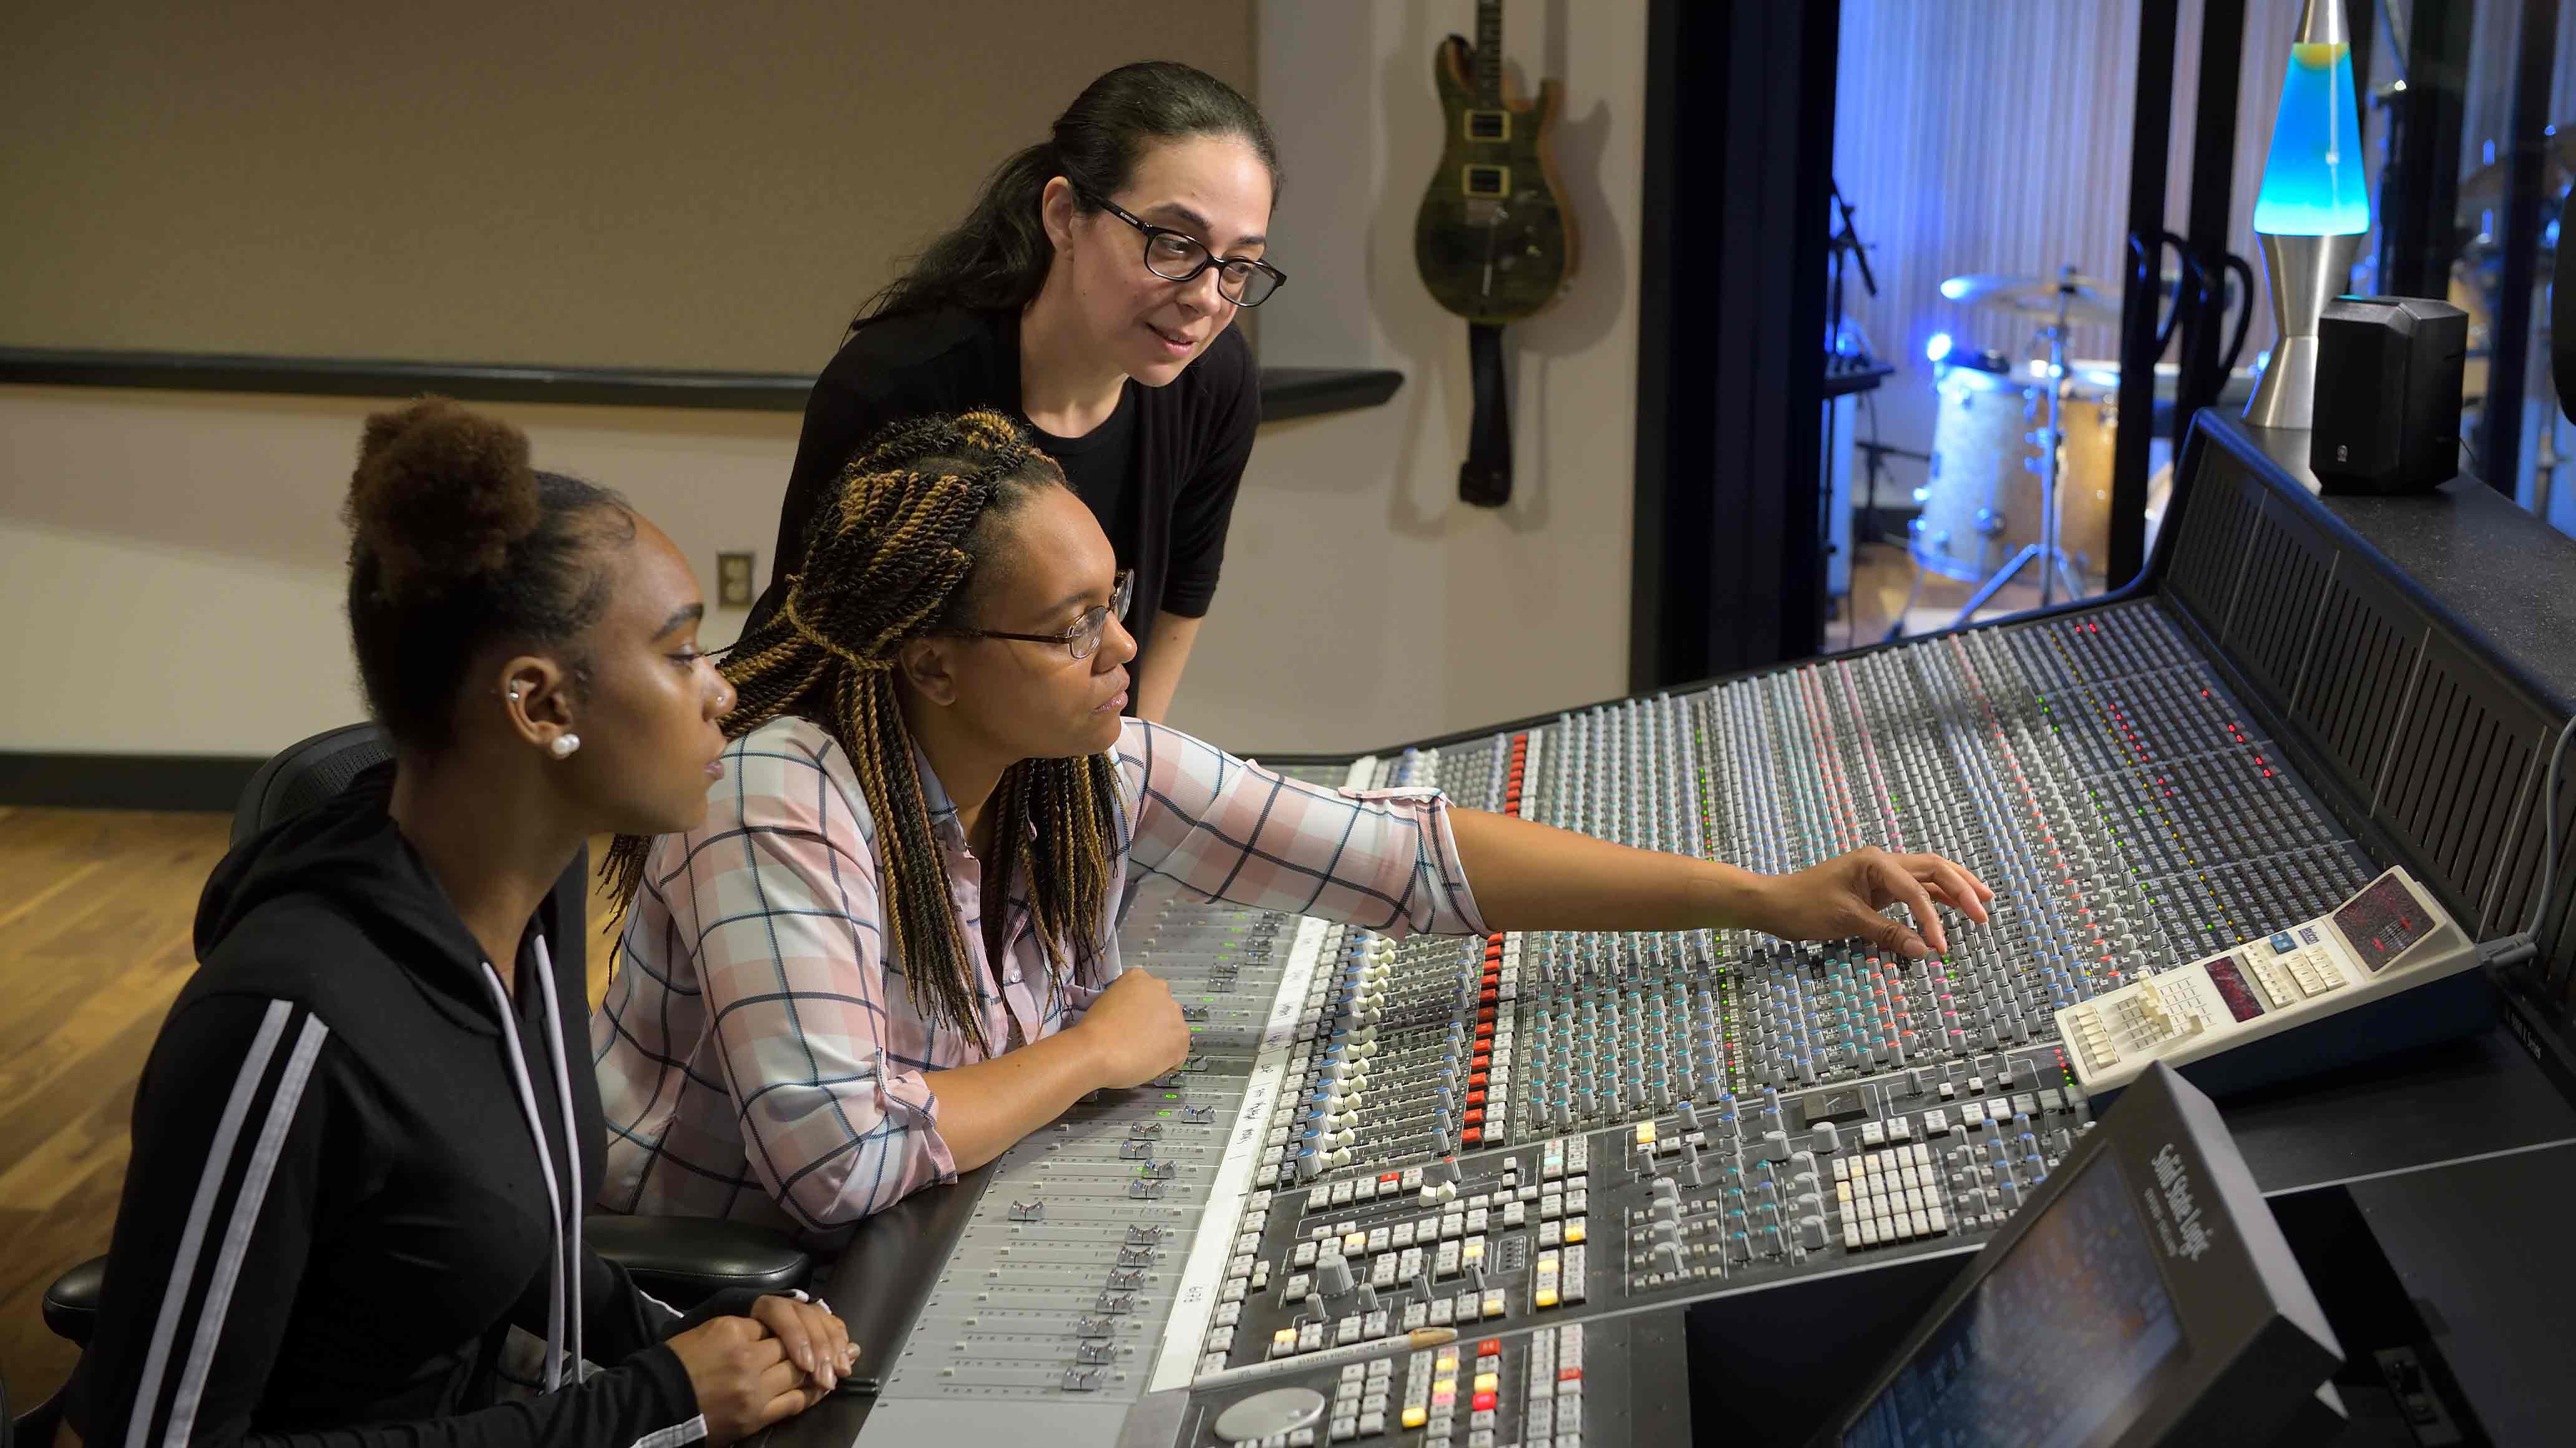 Montco SRT Instructor Jen Mitlas is working with students Shea Walker and her daughter Sasha Walker in the new mixing suite.